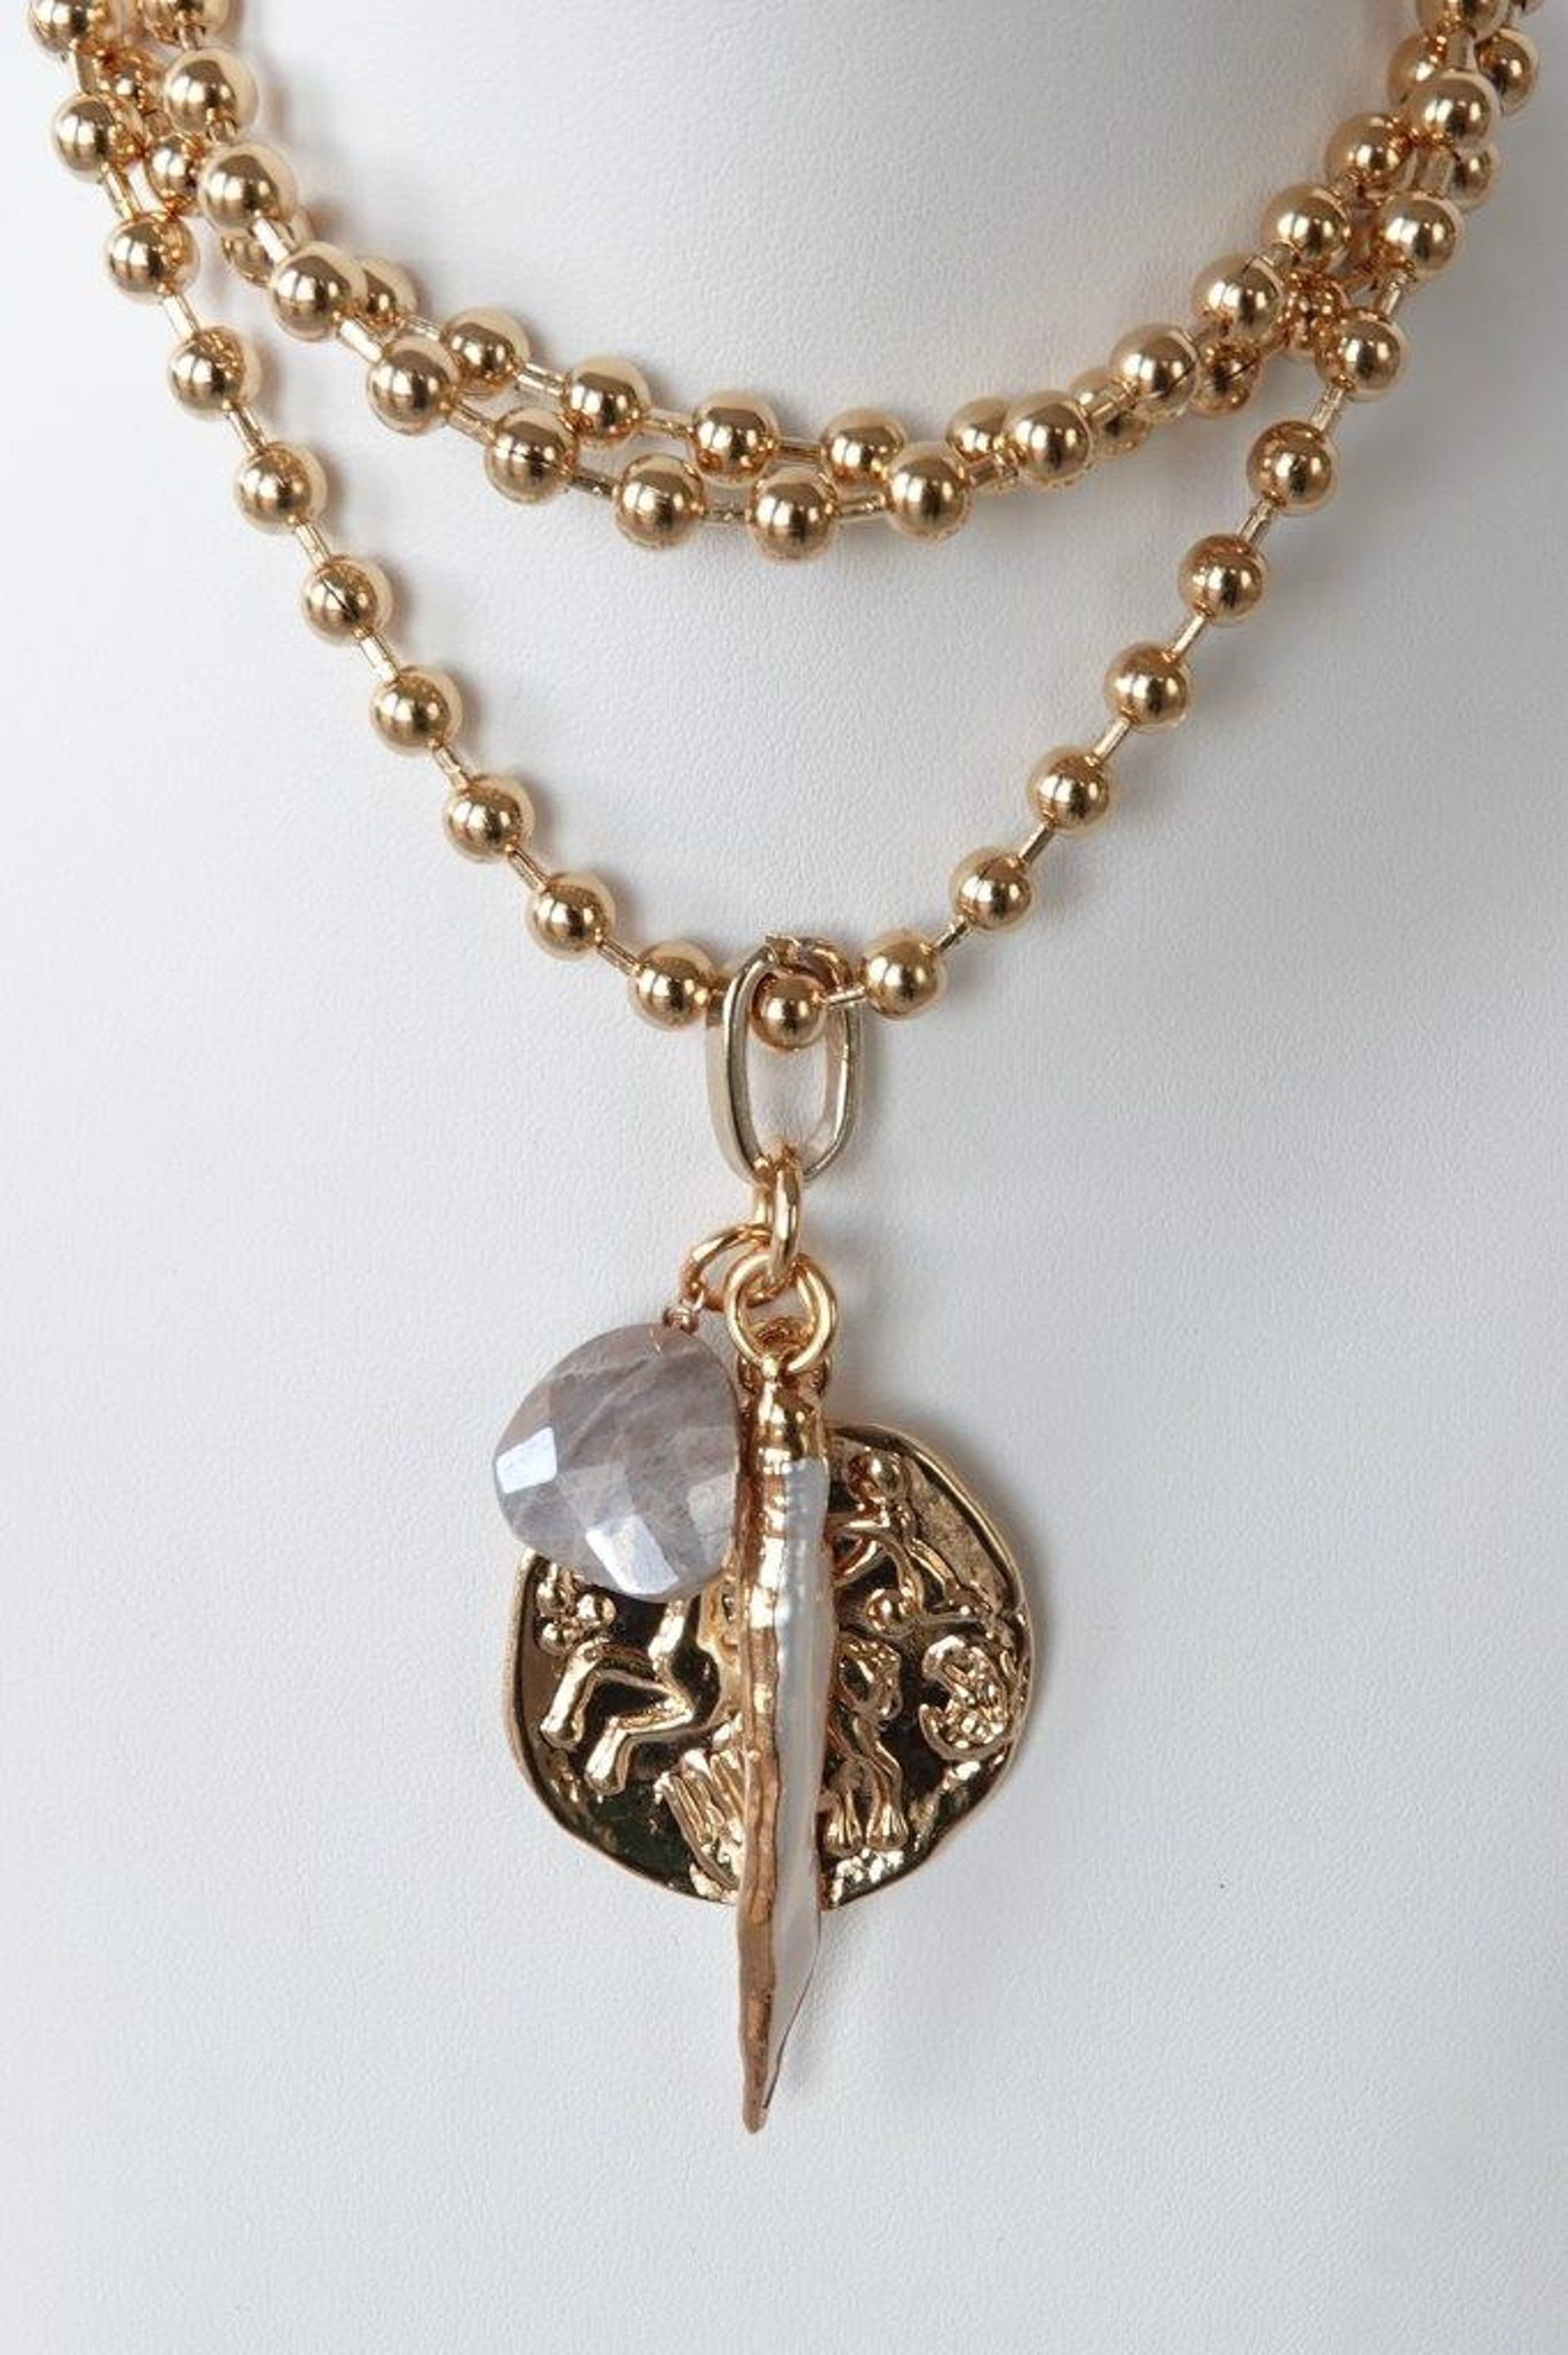 Freshwater pearl, Moonstone and Greek Coin pendant necklace by Christine Renau